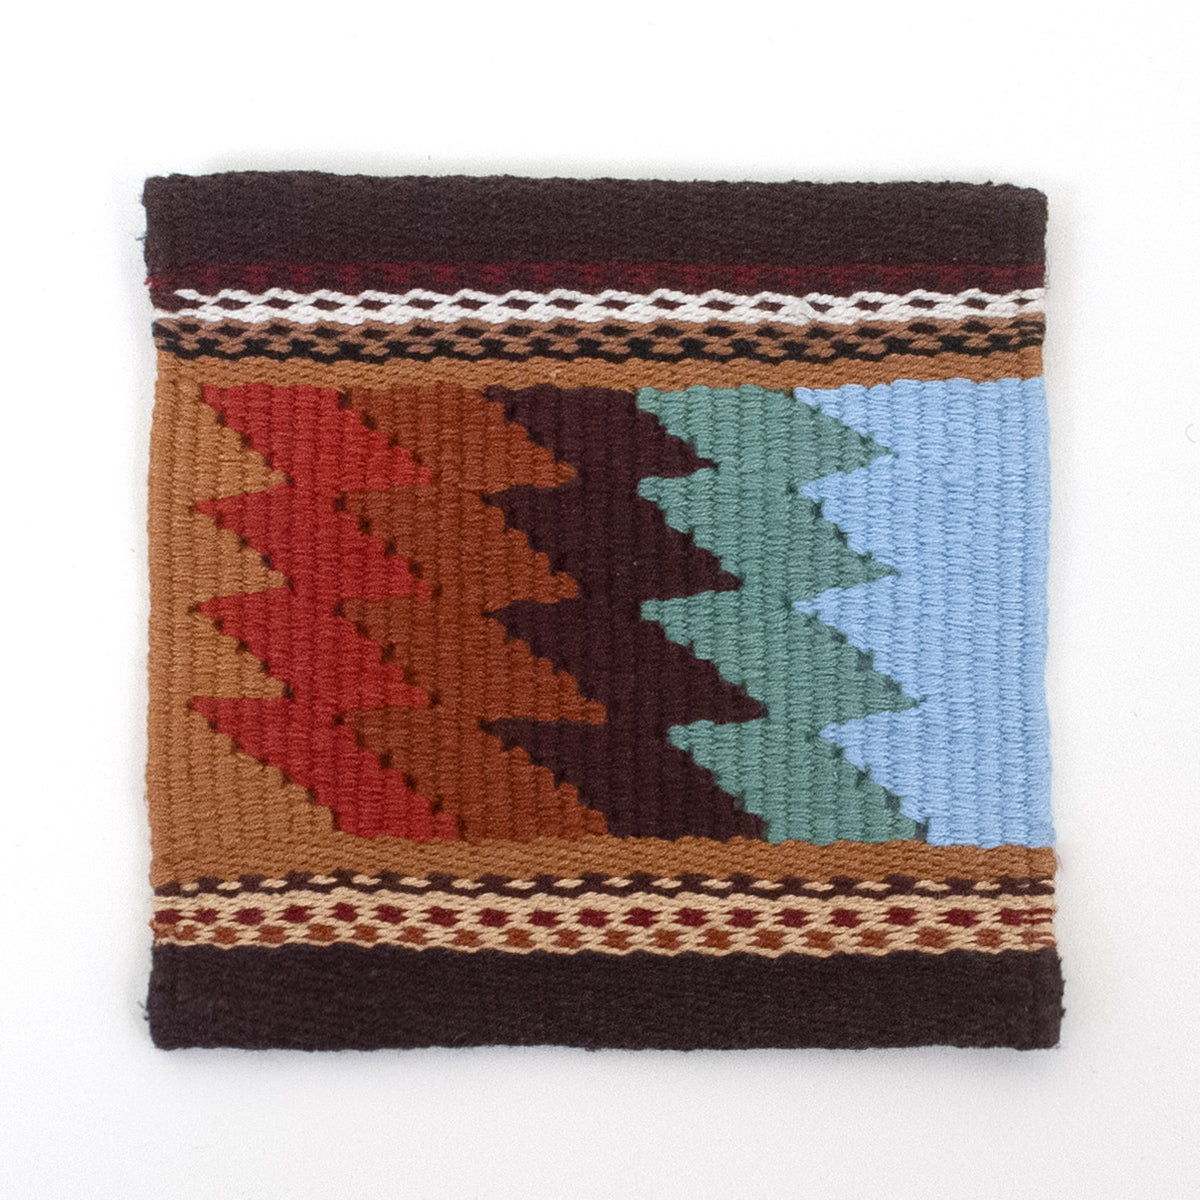 Handwoven Tapestry Coaster Set in Madre Tierra